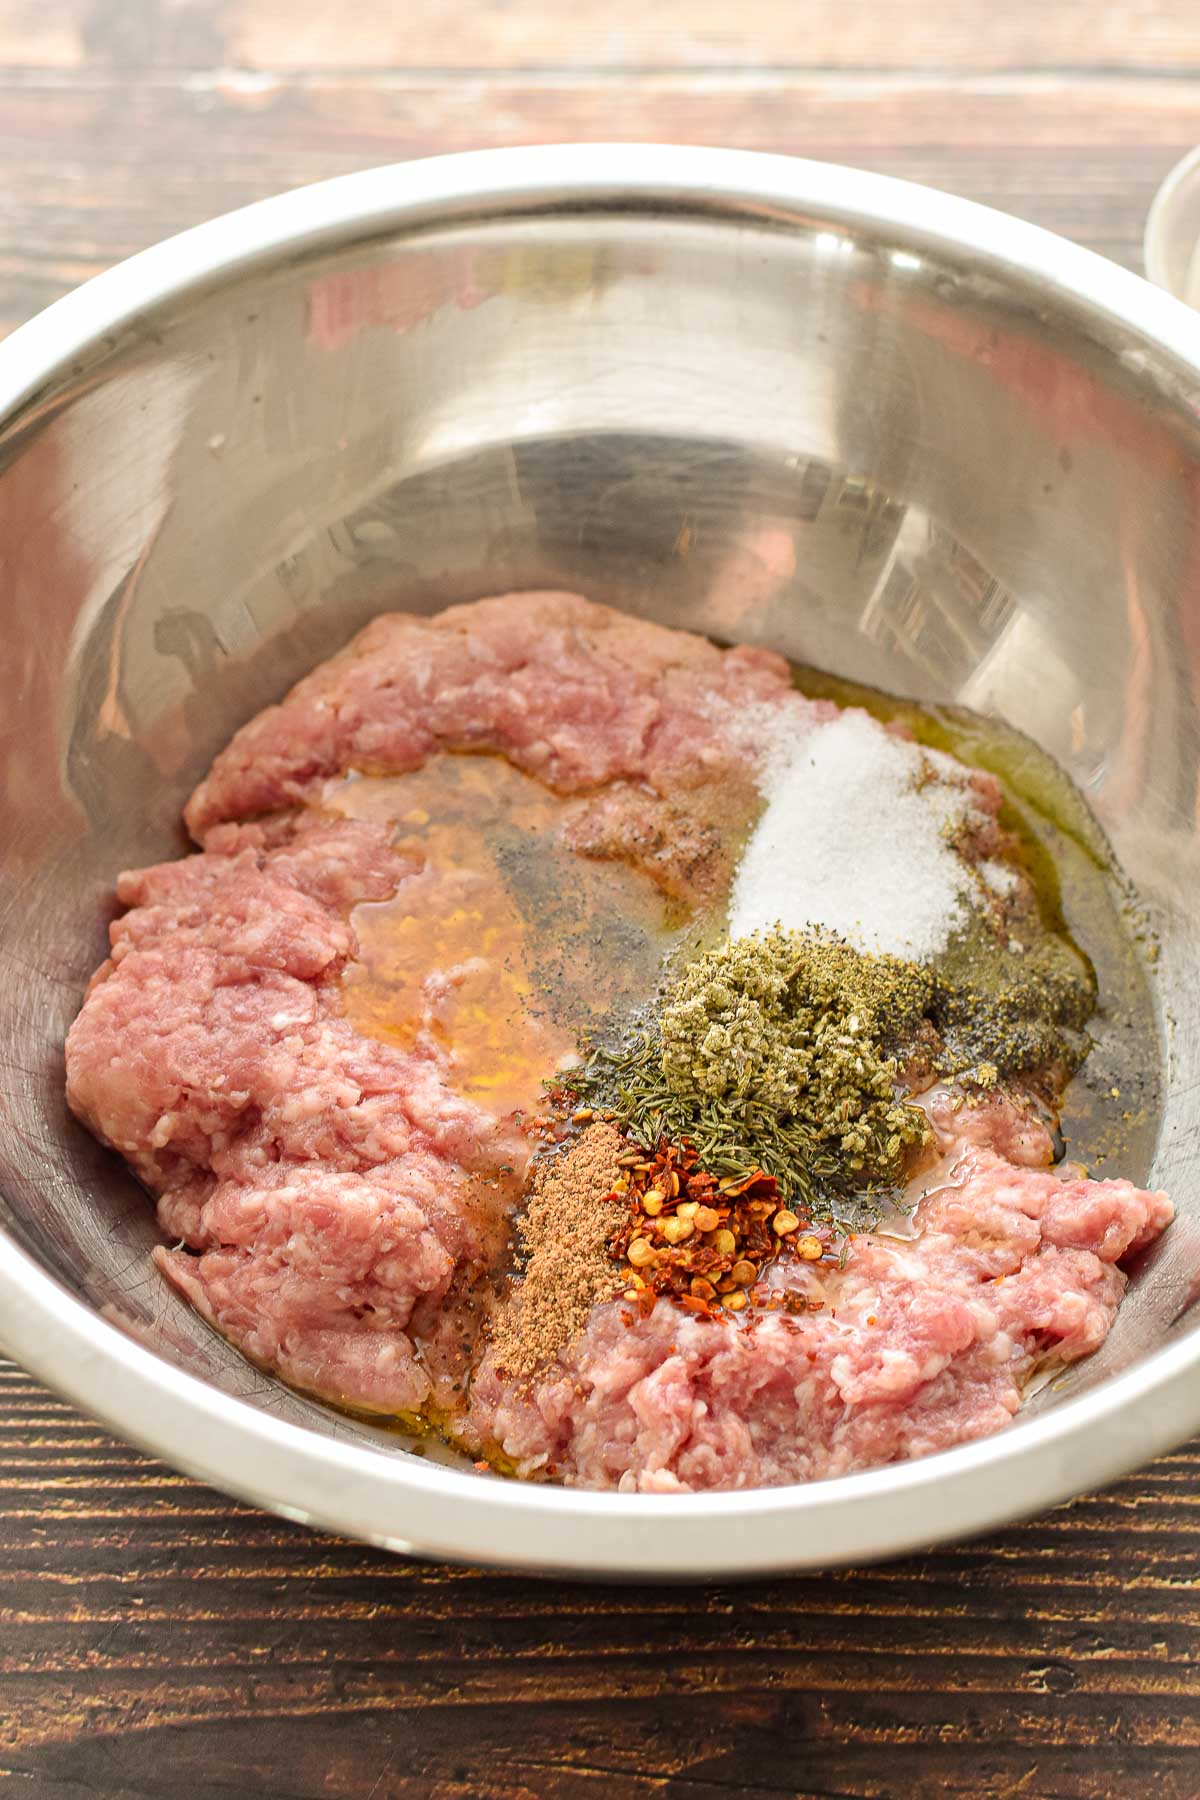 process shot of after low fodmap breakfast sausage ingredients are added to a large mixing bowl